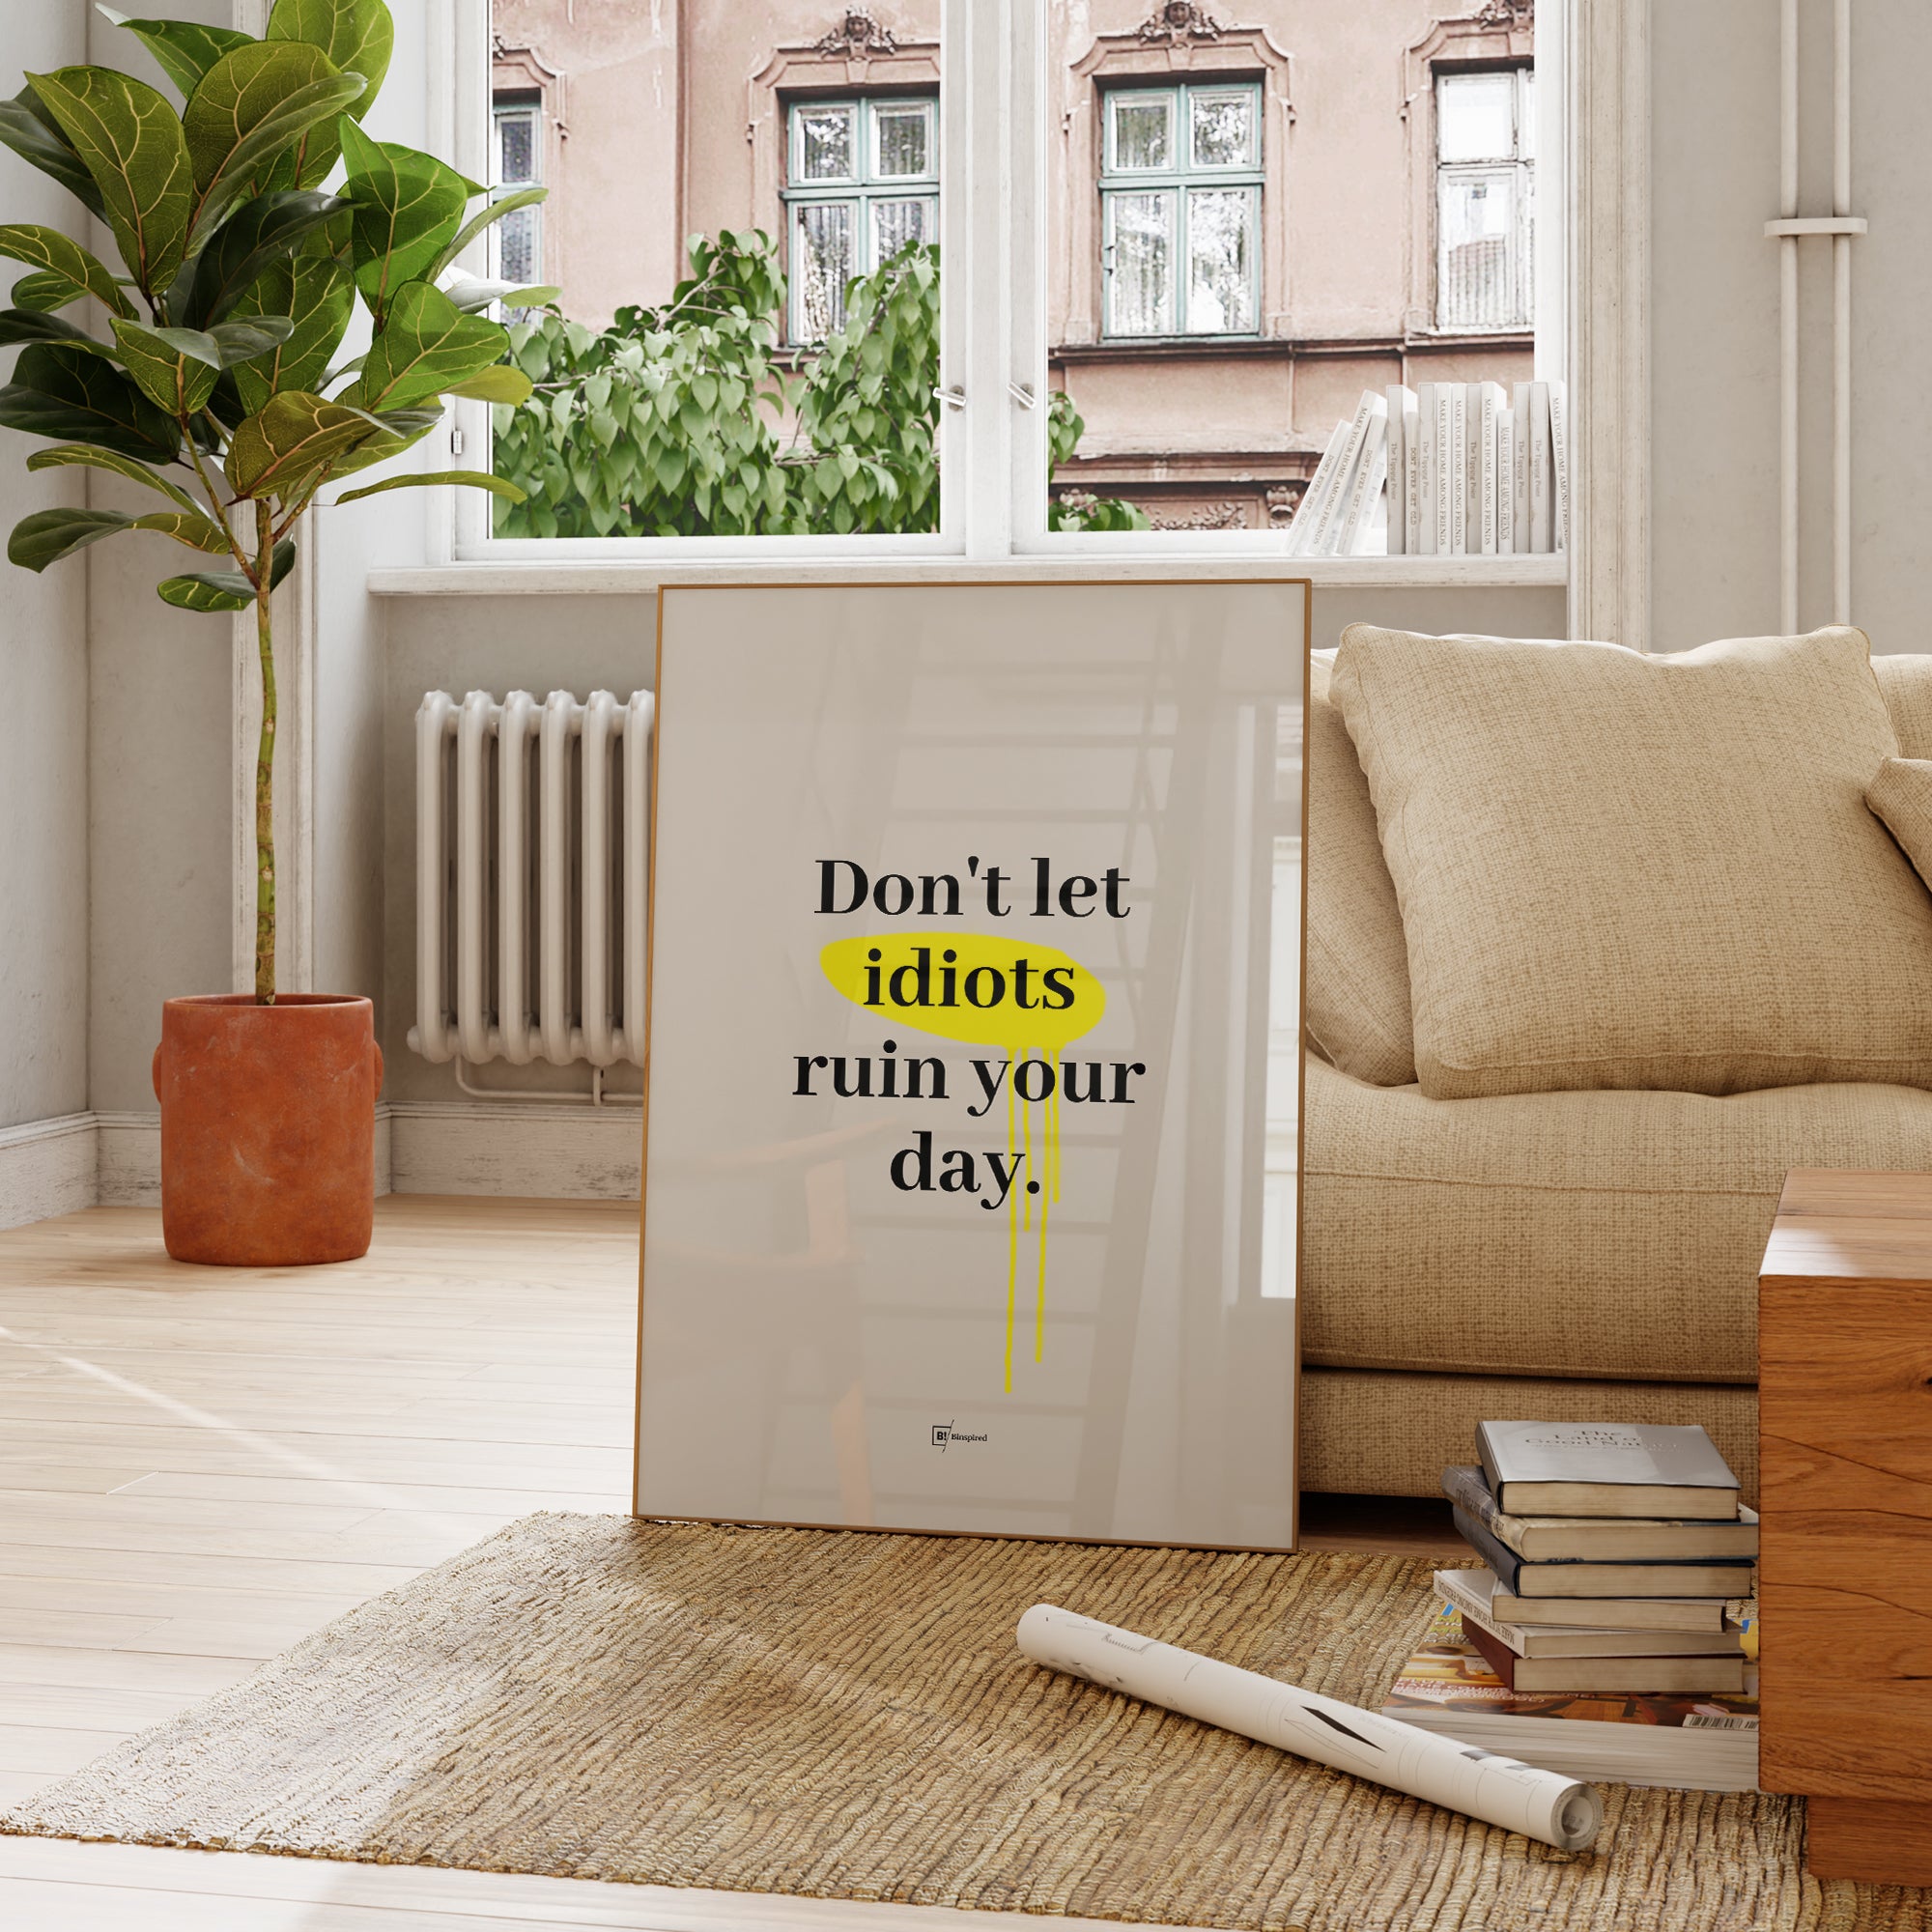 Be inspired by our "Don't let idiots ruin your day" quote art print! This artwork was printed using the giclée process on archival acid-free paper and is presented in a french living room that captures its timeless beauty in every detail.